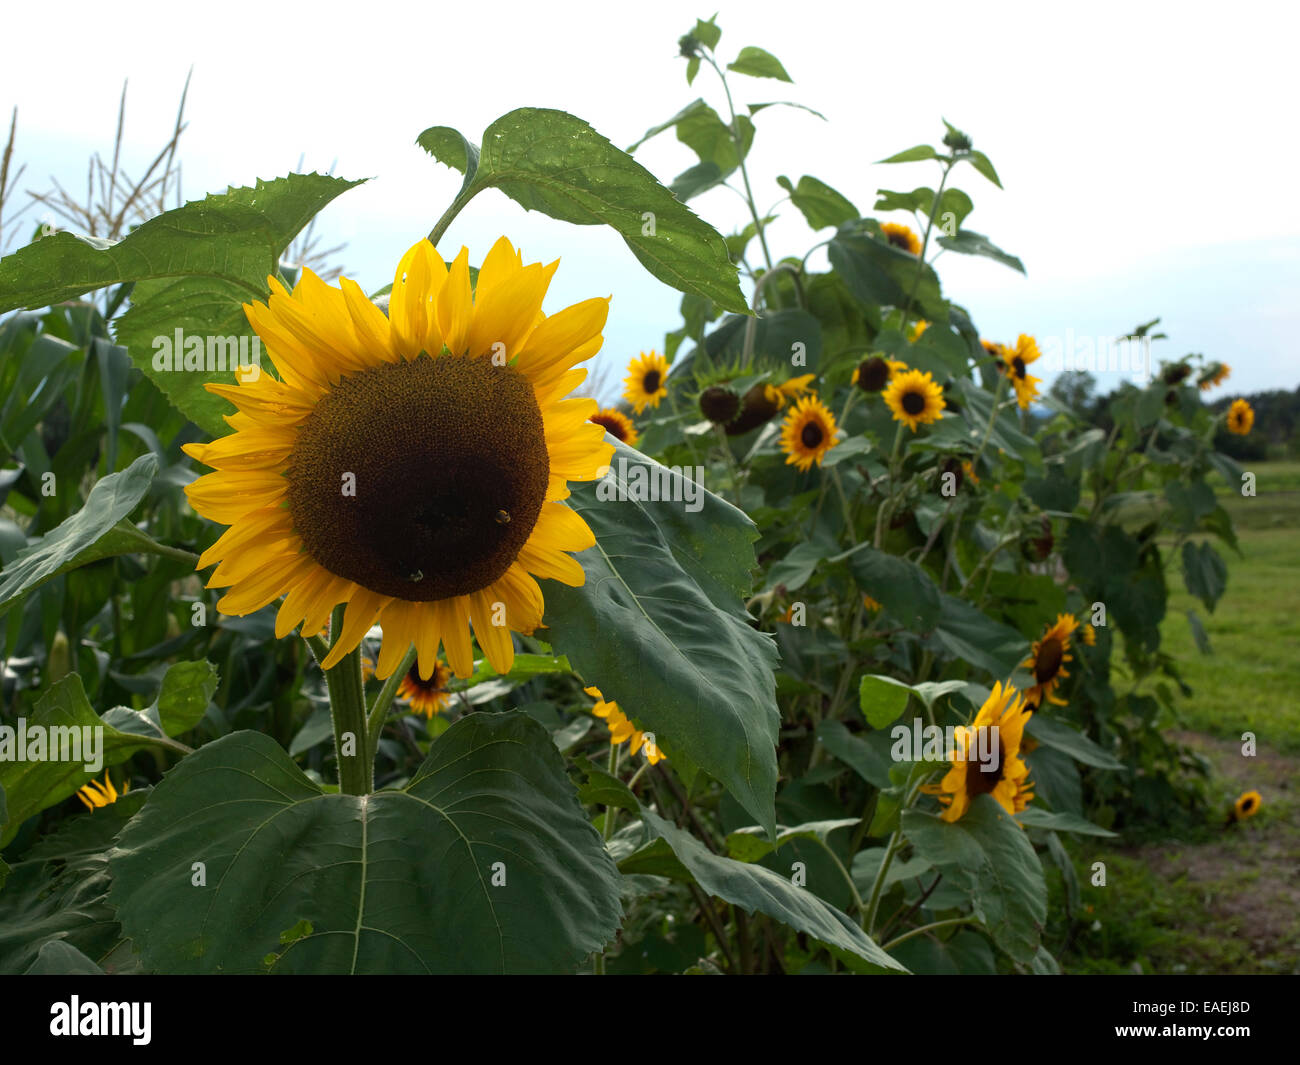 Tournesols growing in field Banque D'Images